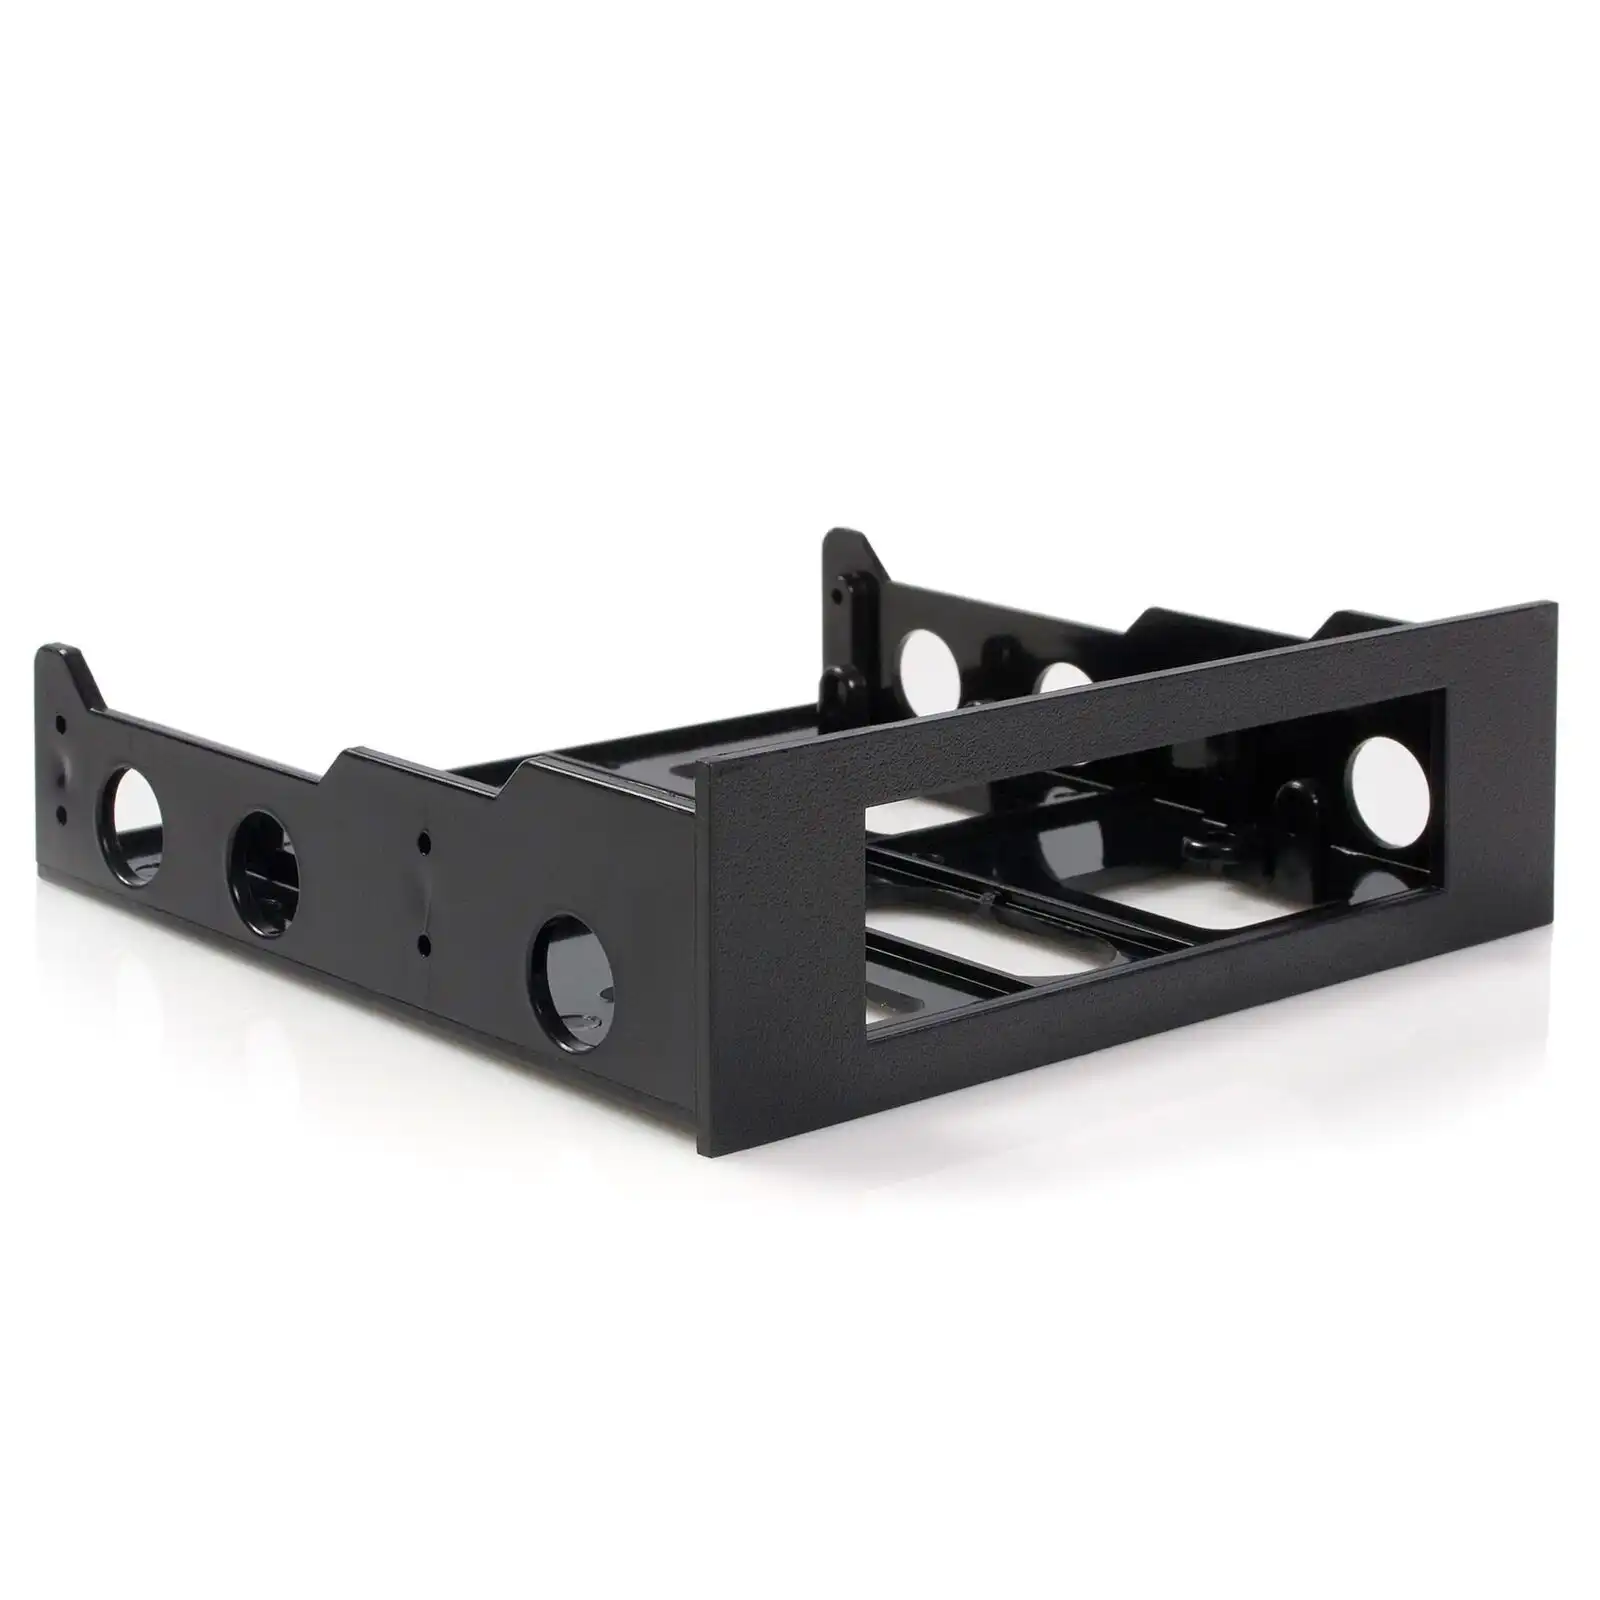 StarTech 3.5" to 5.25" Front Bay Mounting Bracket for Floppy/USB Hub/Card Reader